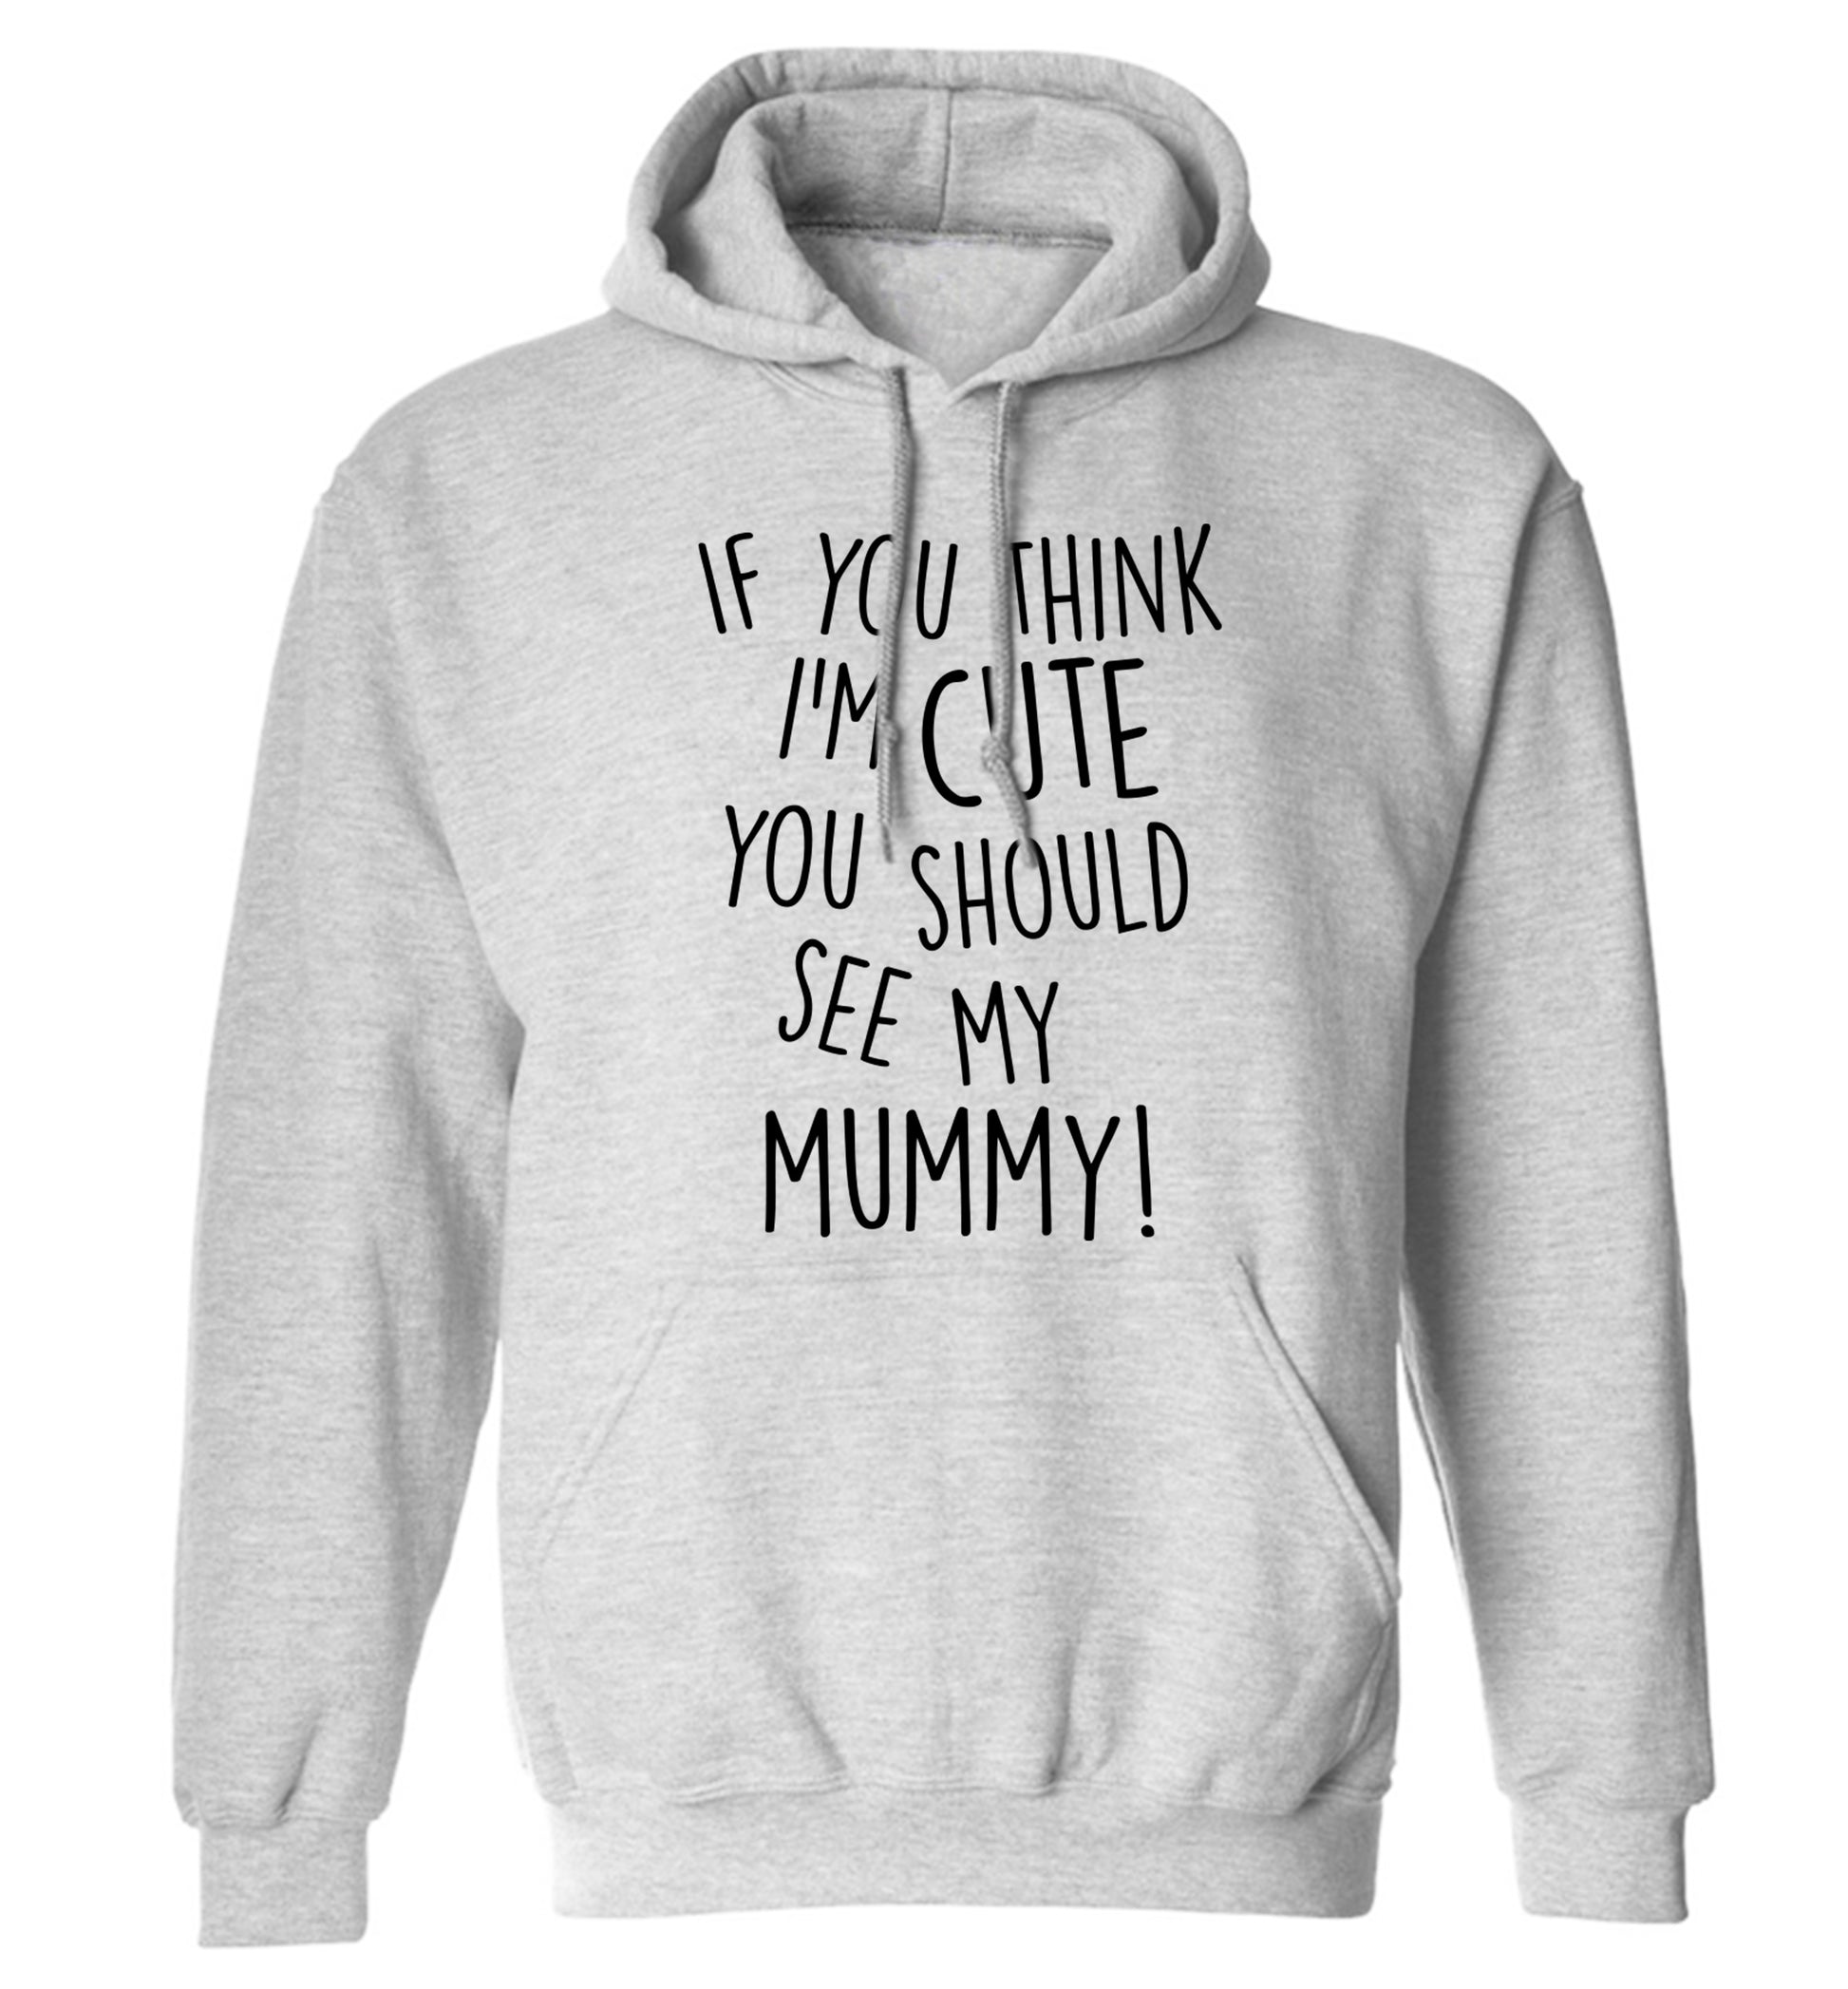 If you think I'm cute you should see my mummy adults unisex grey hoodie 2XL